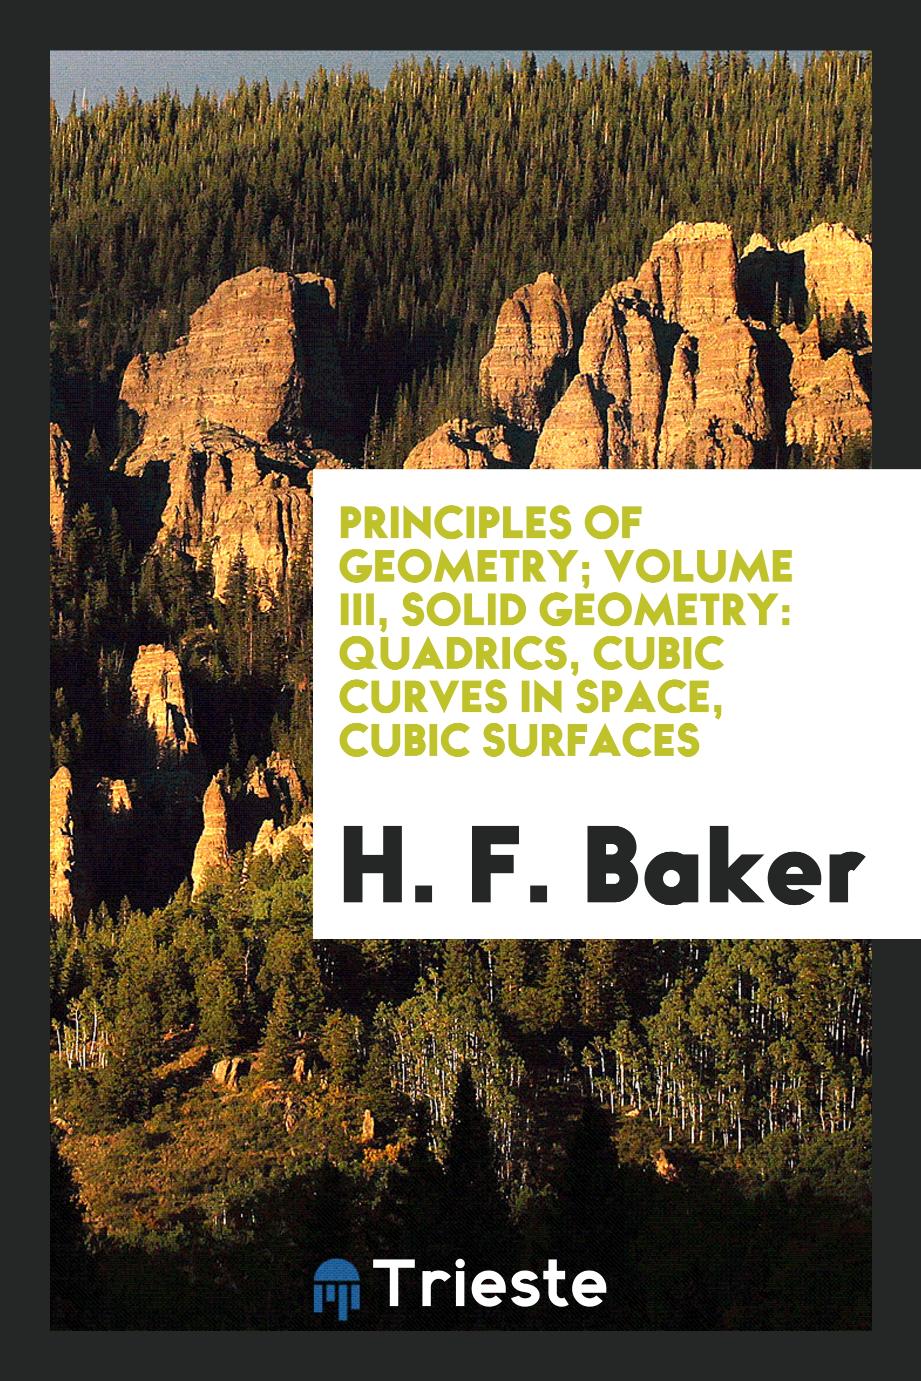 Principles of geometry; Volume III, Solid Geometry: Quadrics, Cubic curves in space, cubic surfaces